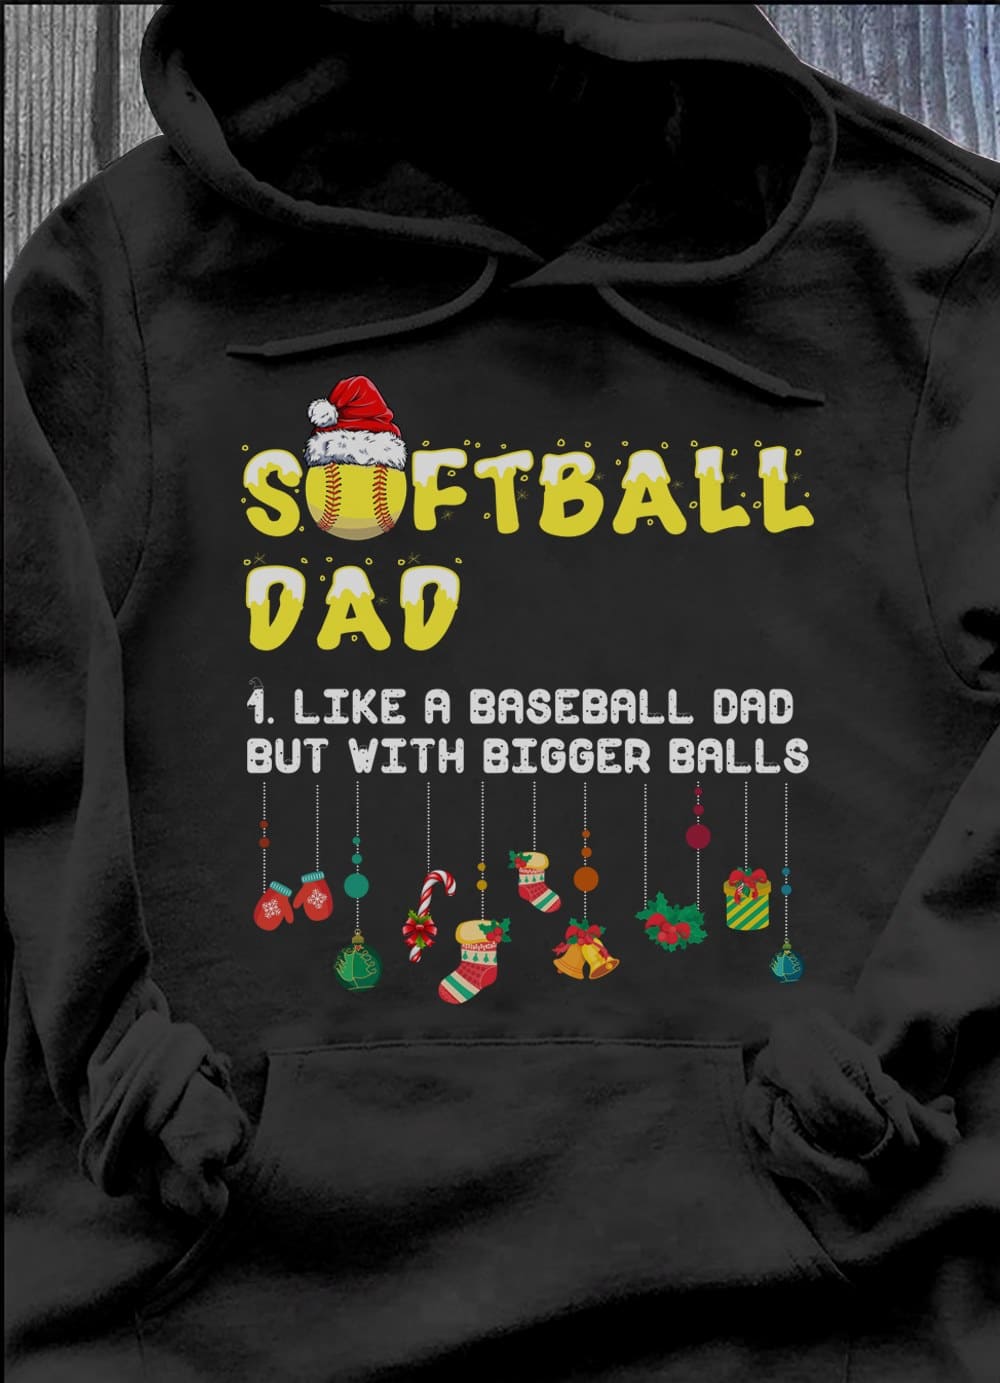 Softball dad - Gift for father's day, like a baseball dad but with bigger balls